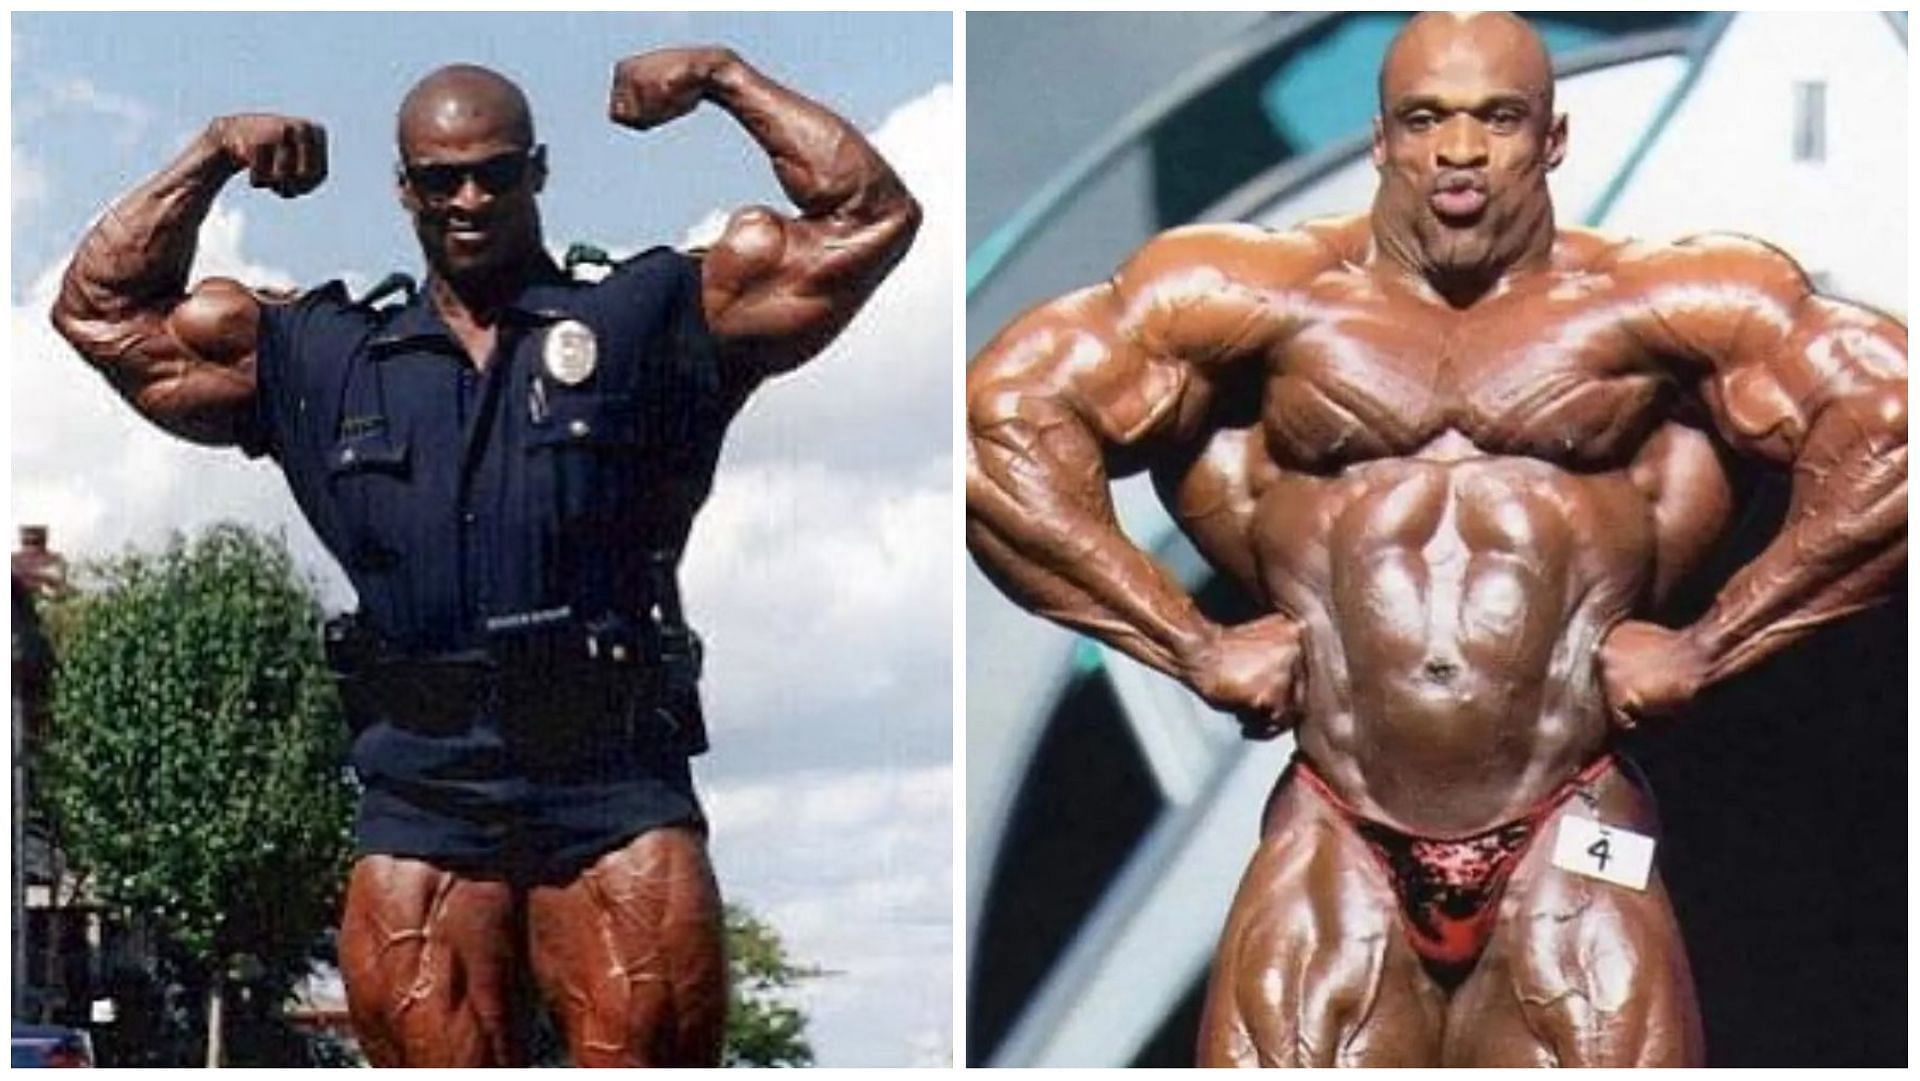 Ronnie Coleman followed a carefully planned workout schedule to get to his enormous muscular bulk. (Image via Instagram @ronniecoleman8)